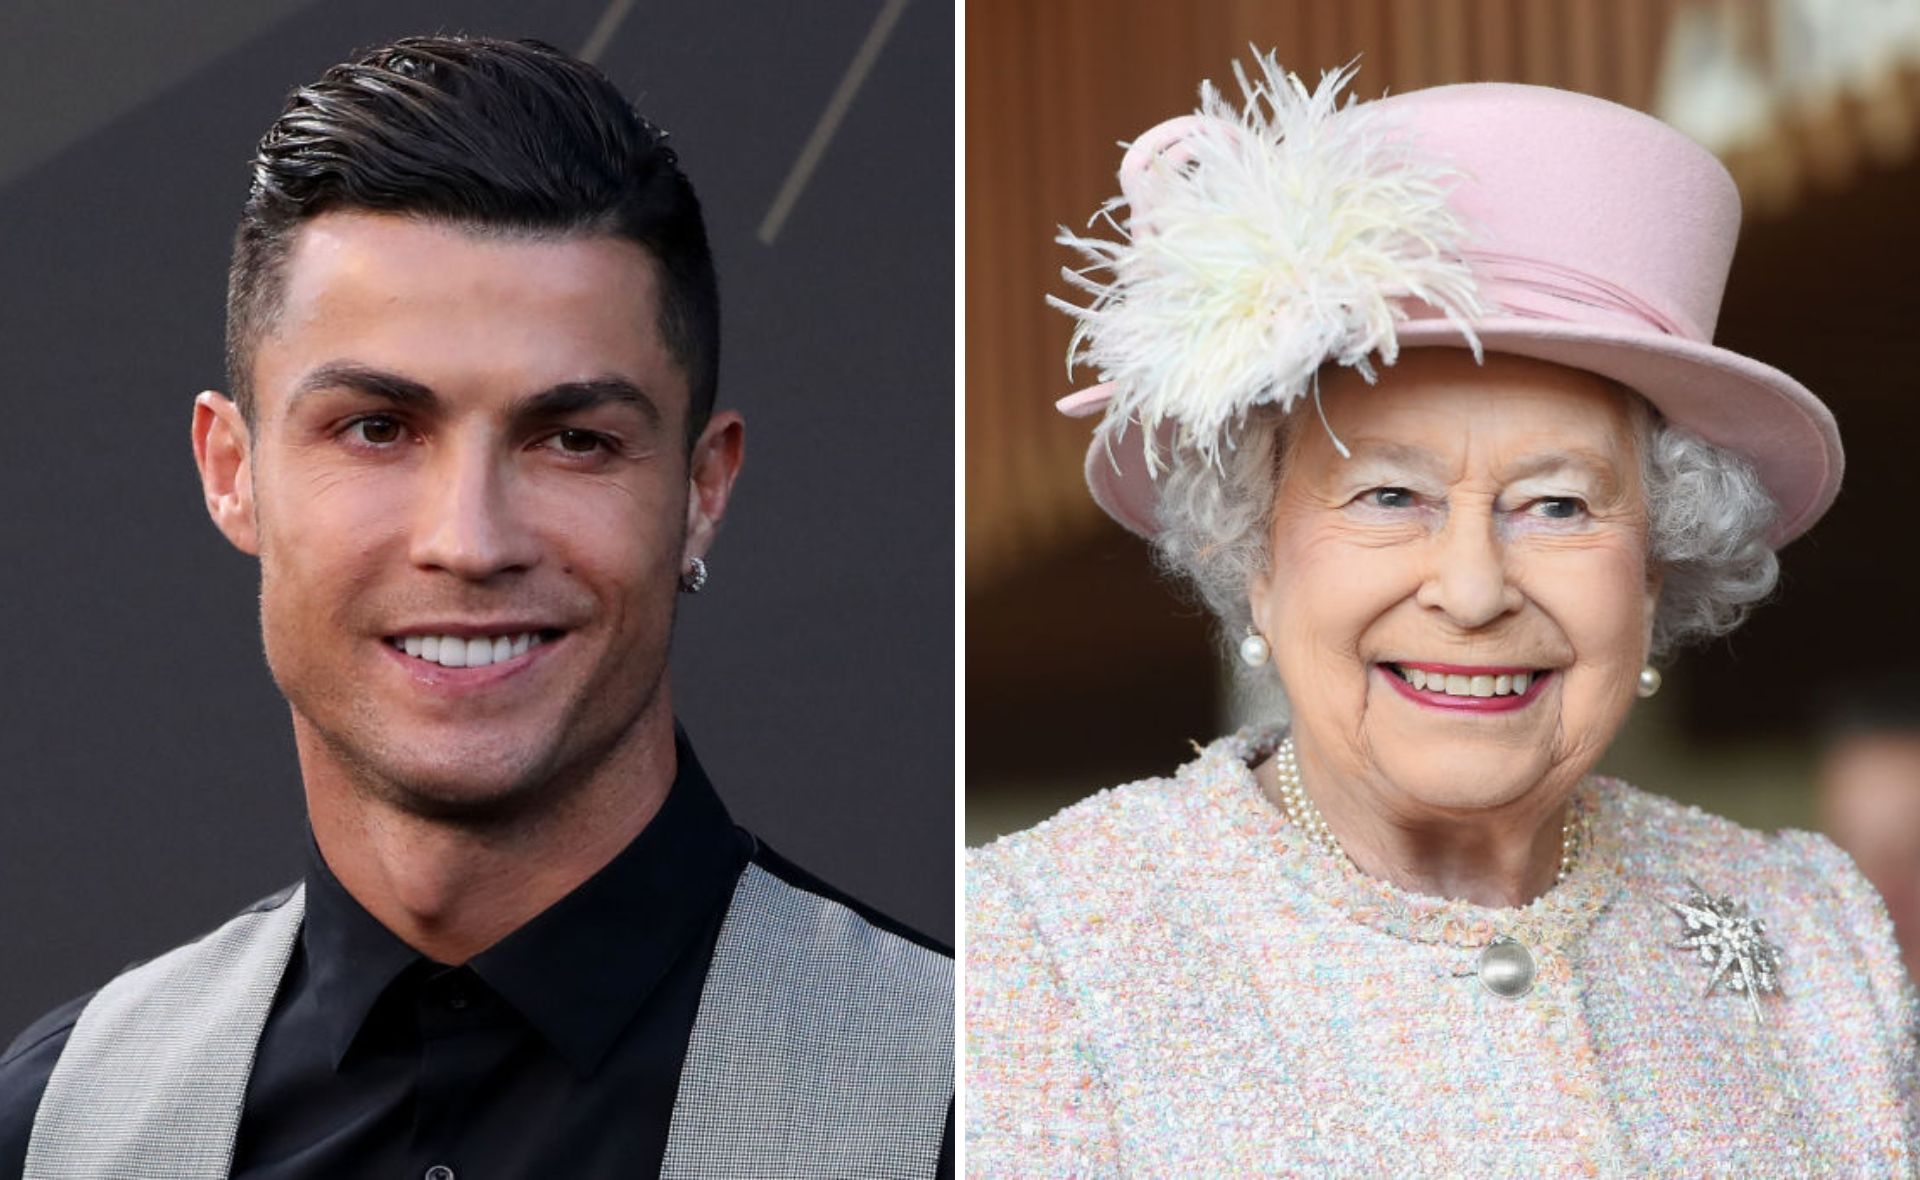 Ronaldo says Queen showed his family ”great kindness” following the death of his son